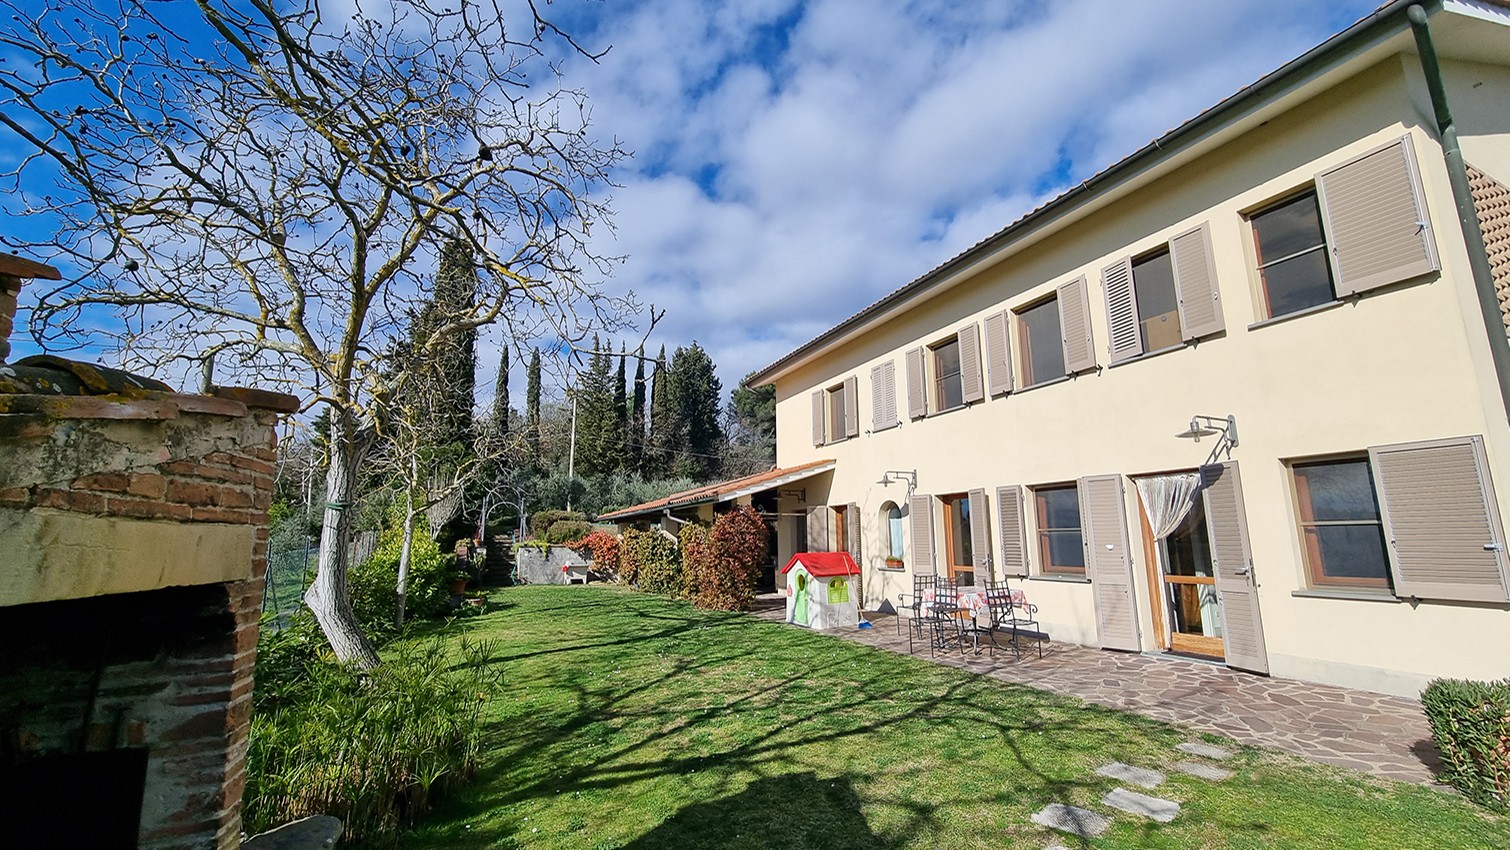 BEAUTIFUL 4 BDR VILLA WITH GARDEN AND SWIMMING POOL, PALAIA, PISA, TUSCANY